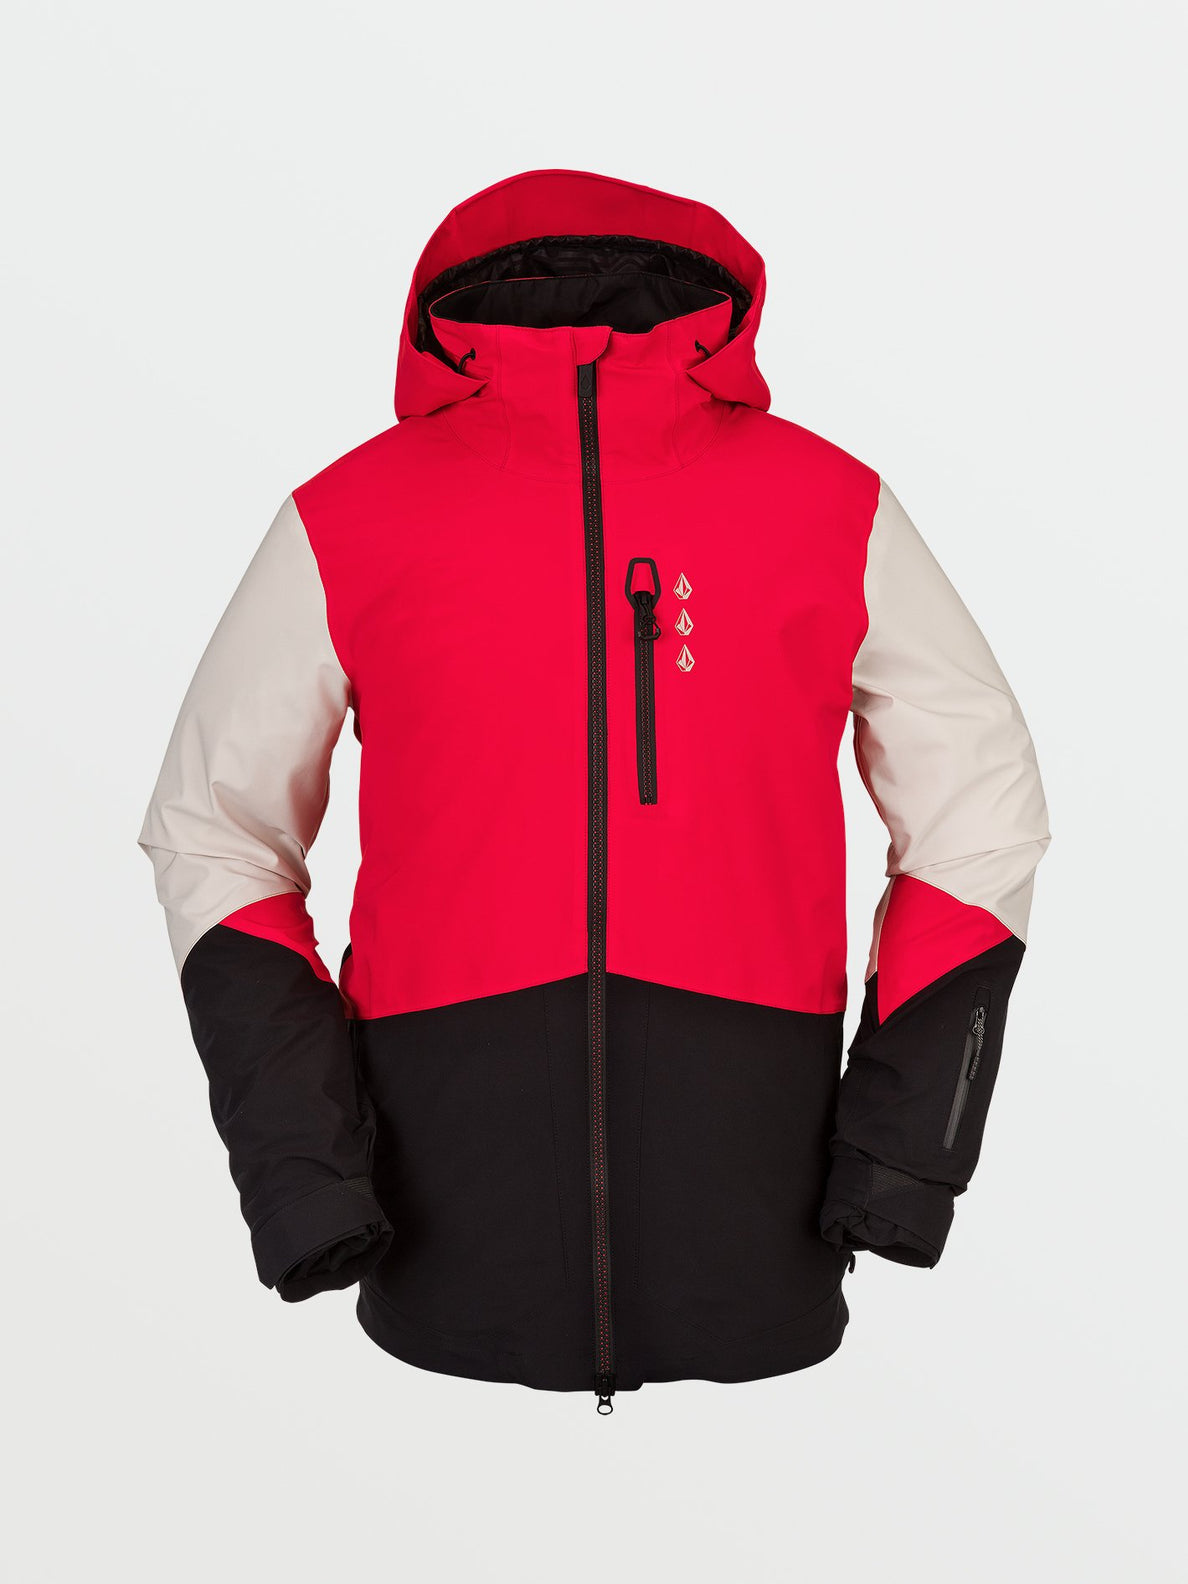 Bl Stretch Gore-Tex Jacket - RED (G0652205_RED) [F]